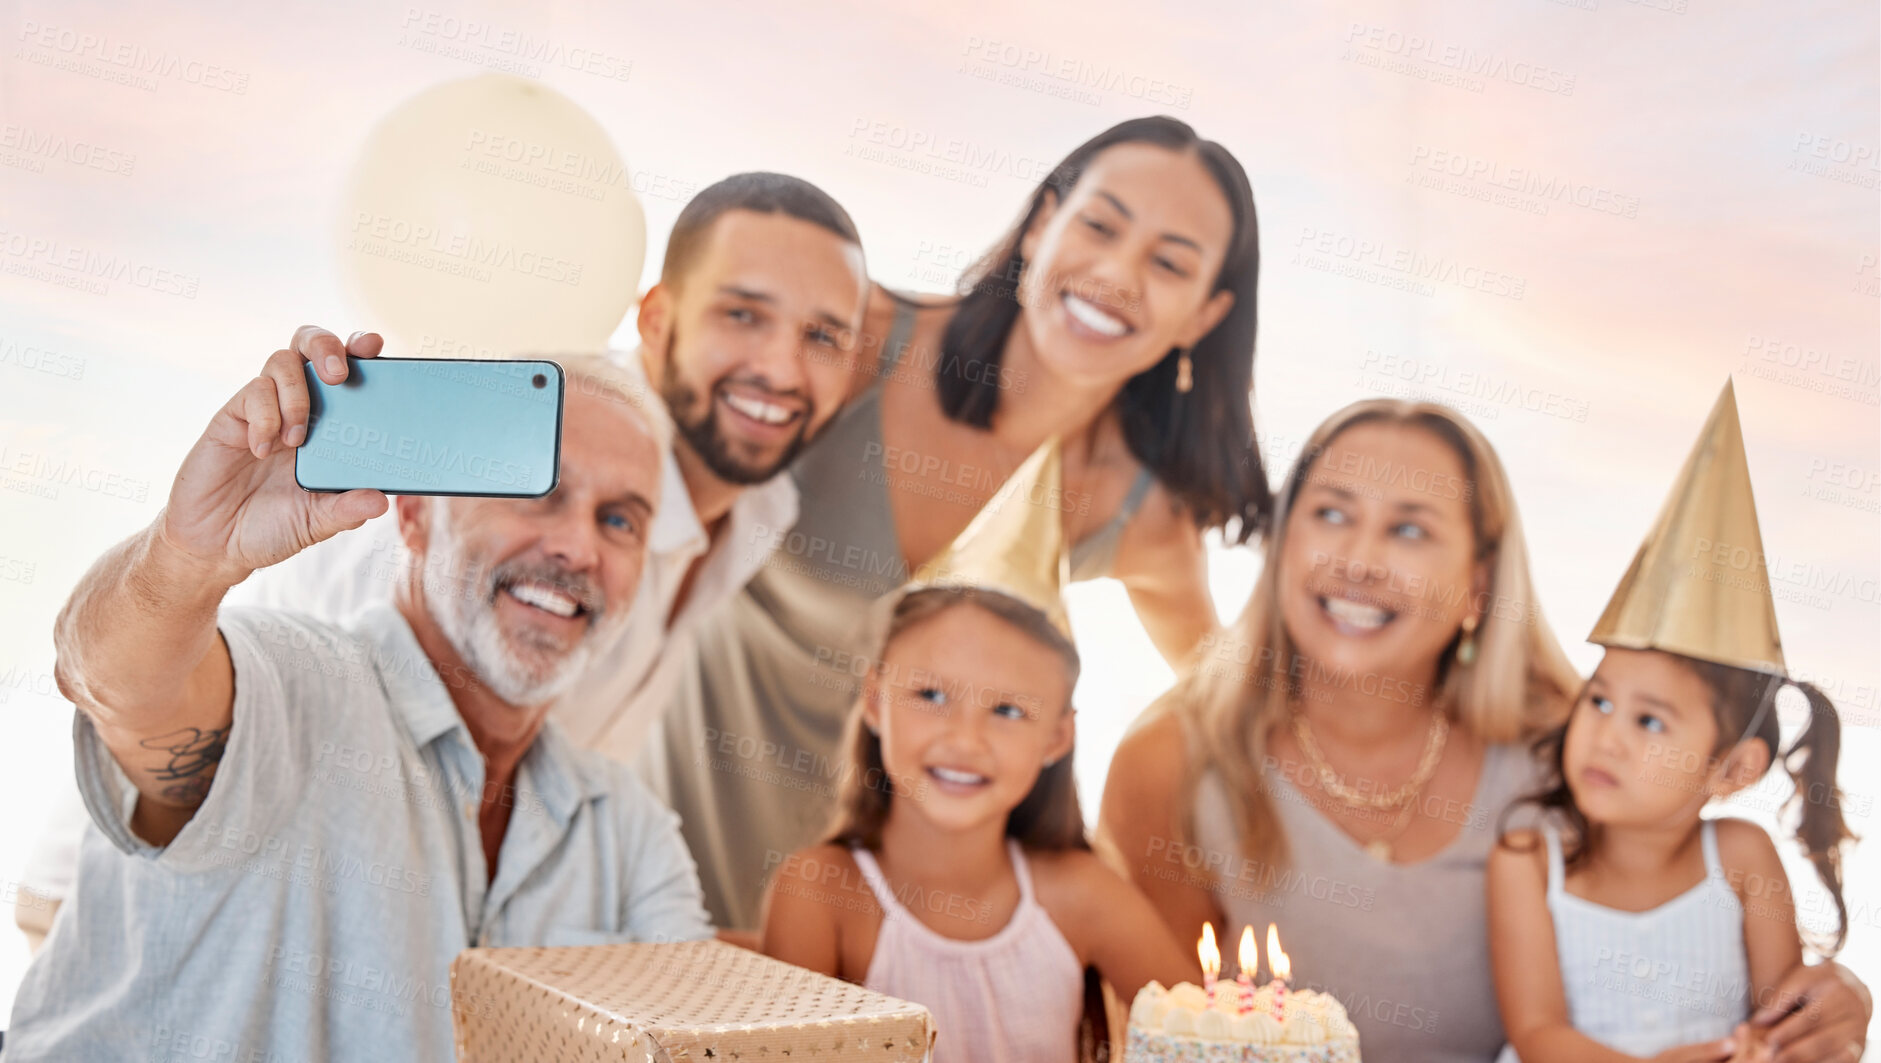 Buy stock photo Party, family and birthday phone selfie with grandparents, parents and young children celebrating. Interracial, happy and celebration with birthday cake photograph of grandpa, grandma and kids.